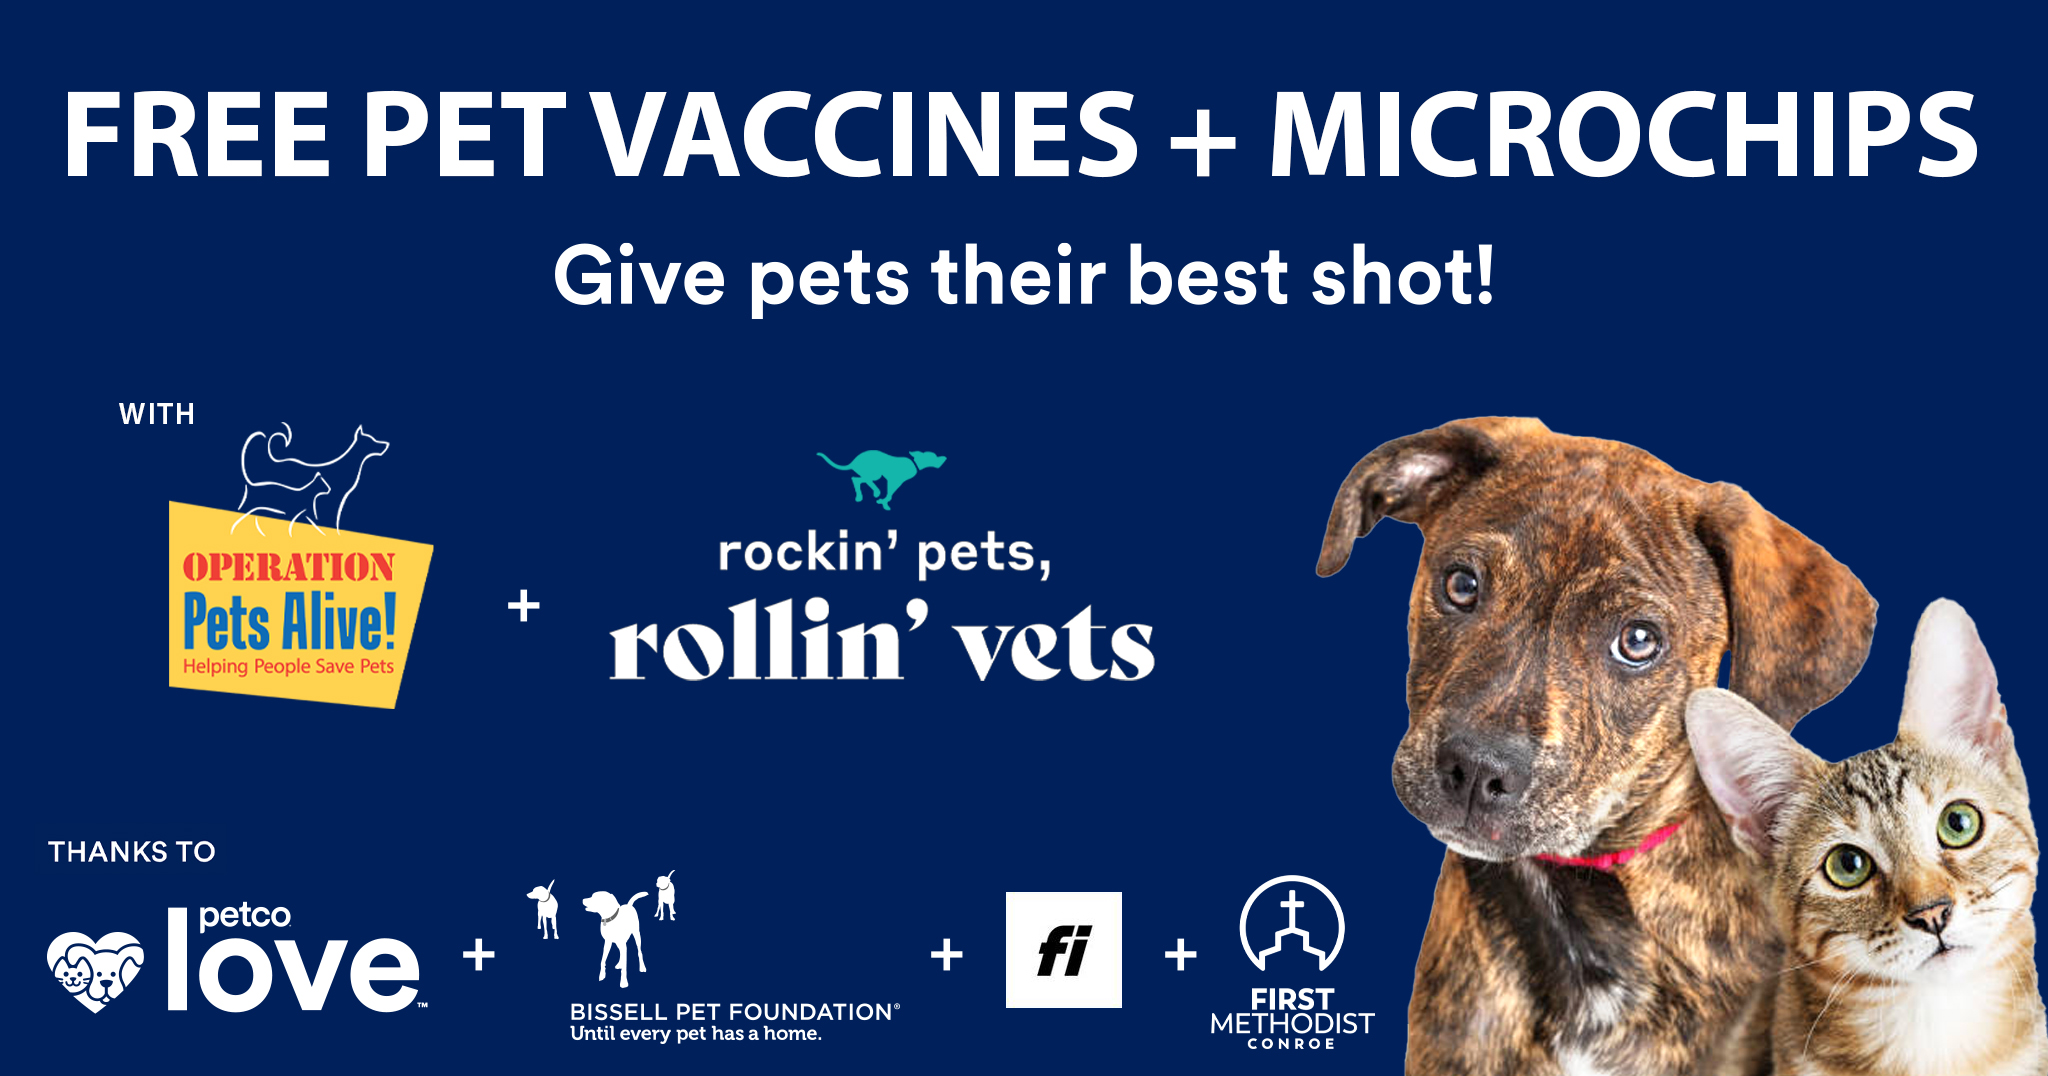 Free Vaccines and Microchips event